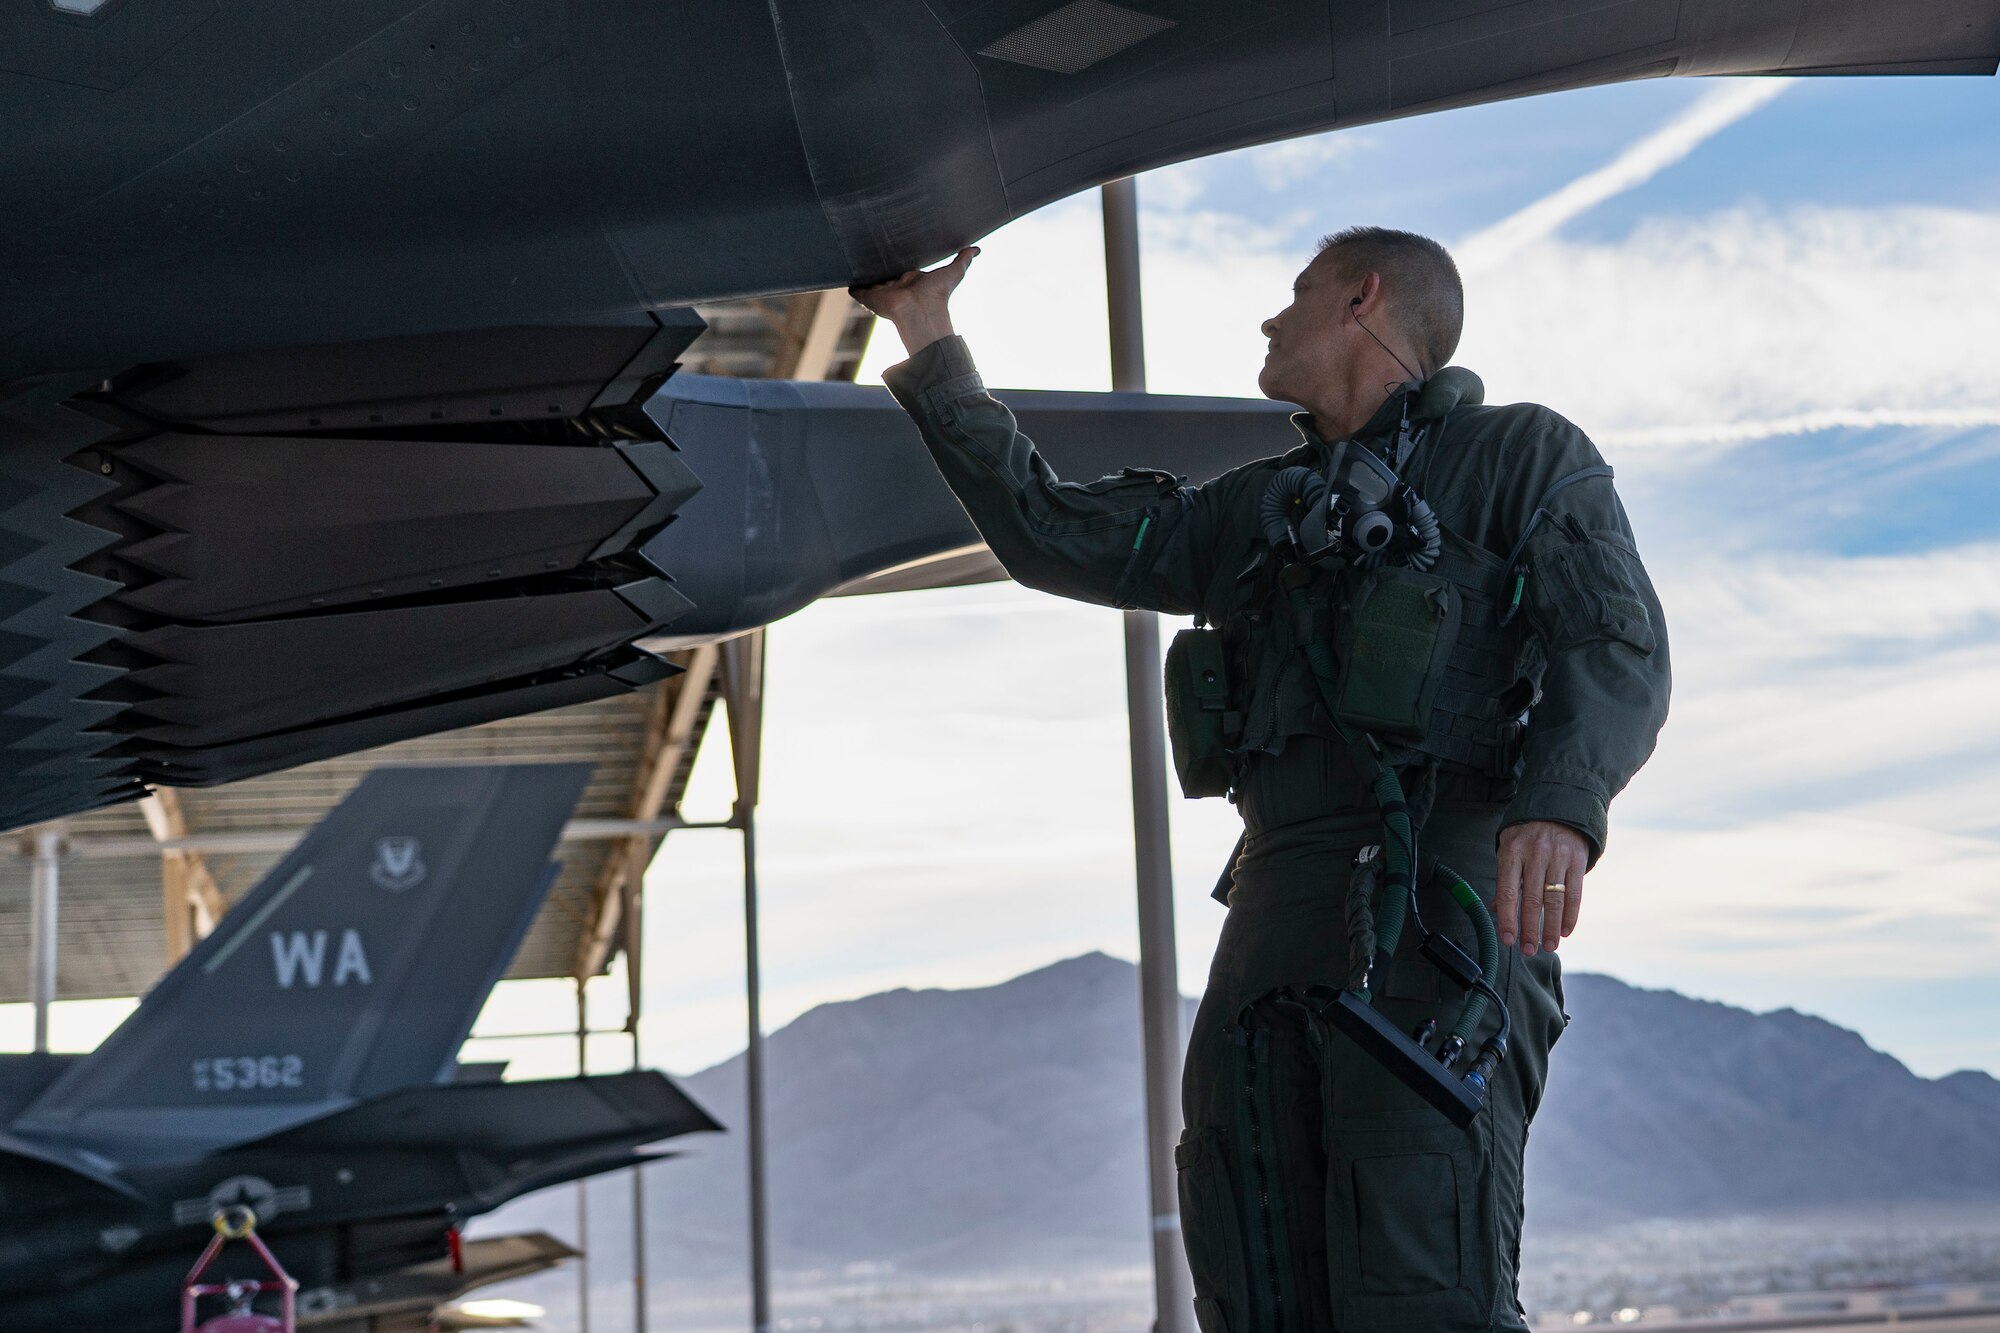 Brig. Gen. Michael Rawls, Air Force Operational Test and Evaluation Center commander, performs a pre-flight check on an F-35A Lightning II at Nellis Air Force Base, Nevada, Jan. 12, 2023. Gen. Rawls is committed to the continued modernization of the Air Force to ensure the United States remains at the forefront of air power. (U.S. Air Force photo by Airman First Class Trevor Bell)